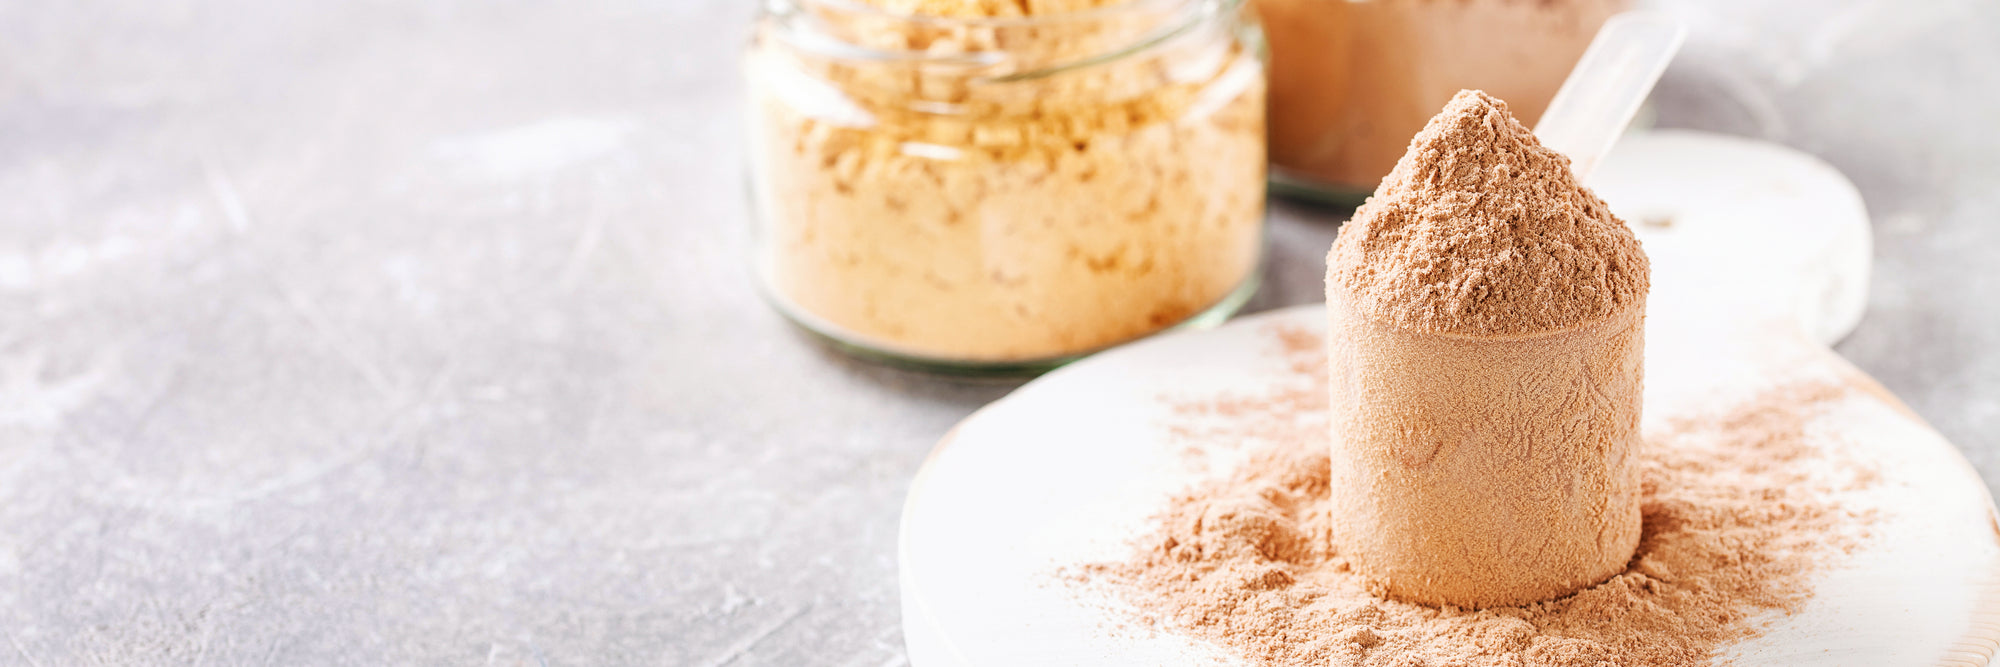 Protein Powder 101: Benefits, Effects & How To Use